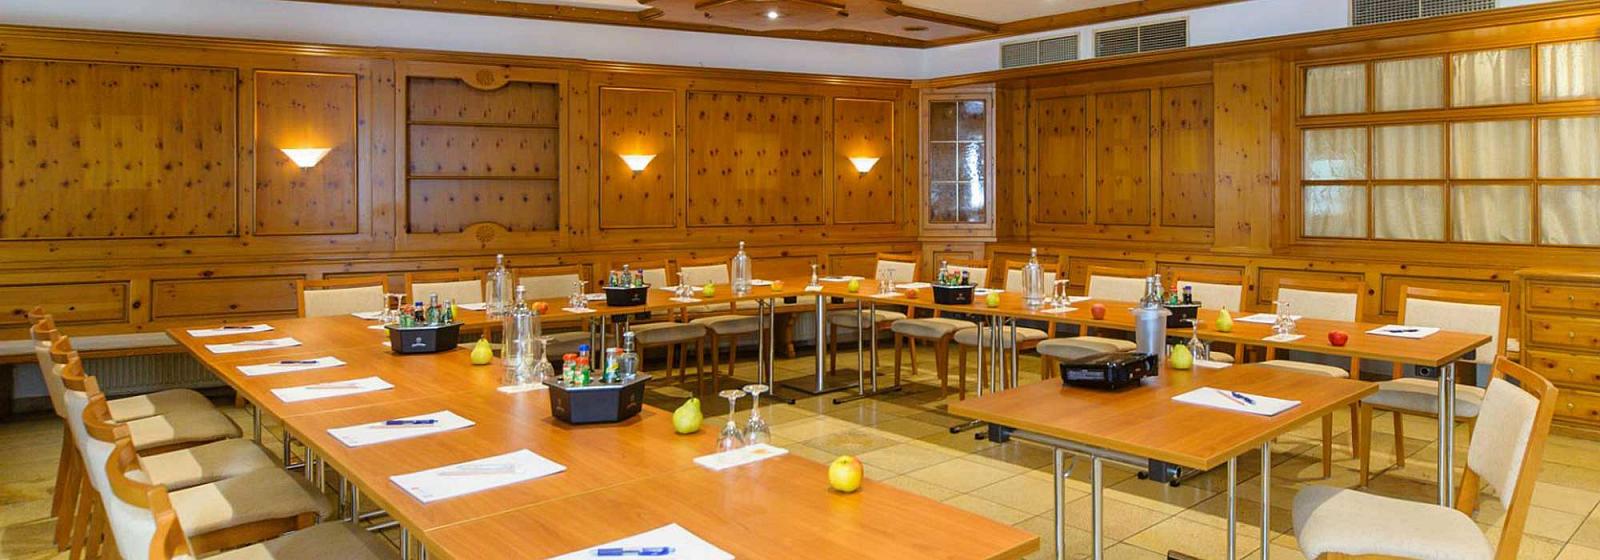 Akzent-Hotel Goldner Stern: Certified Conference Hotel